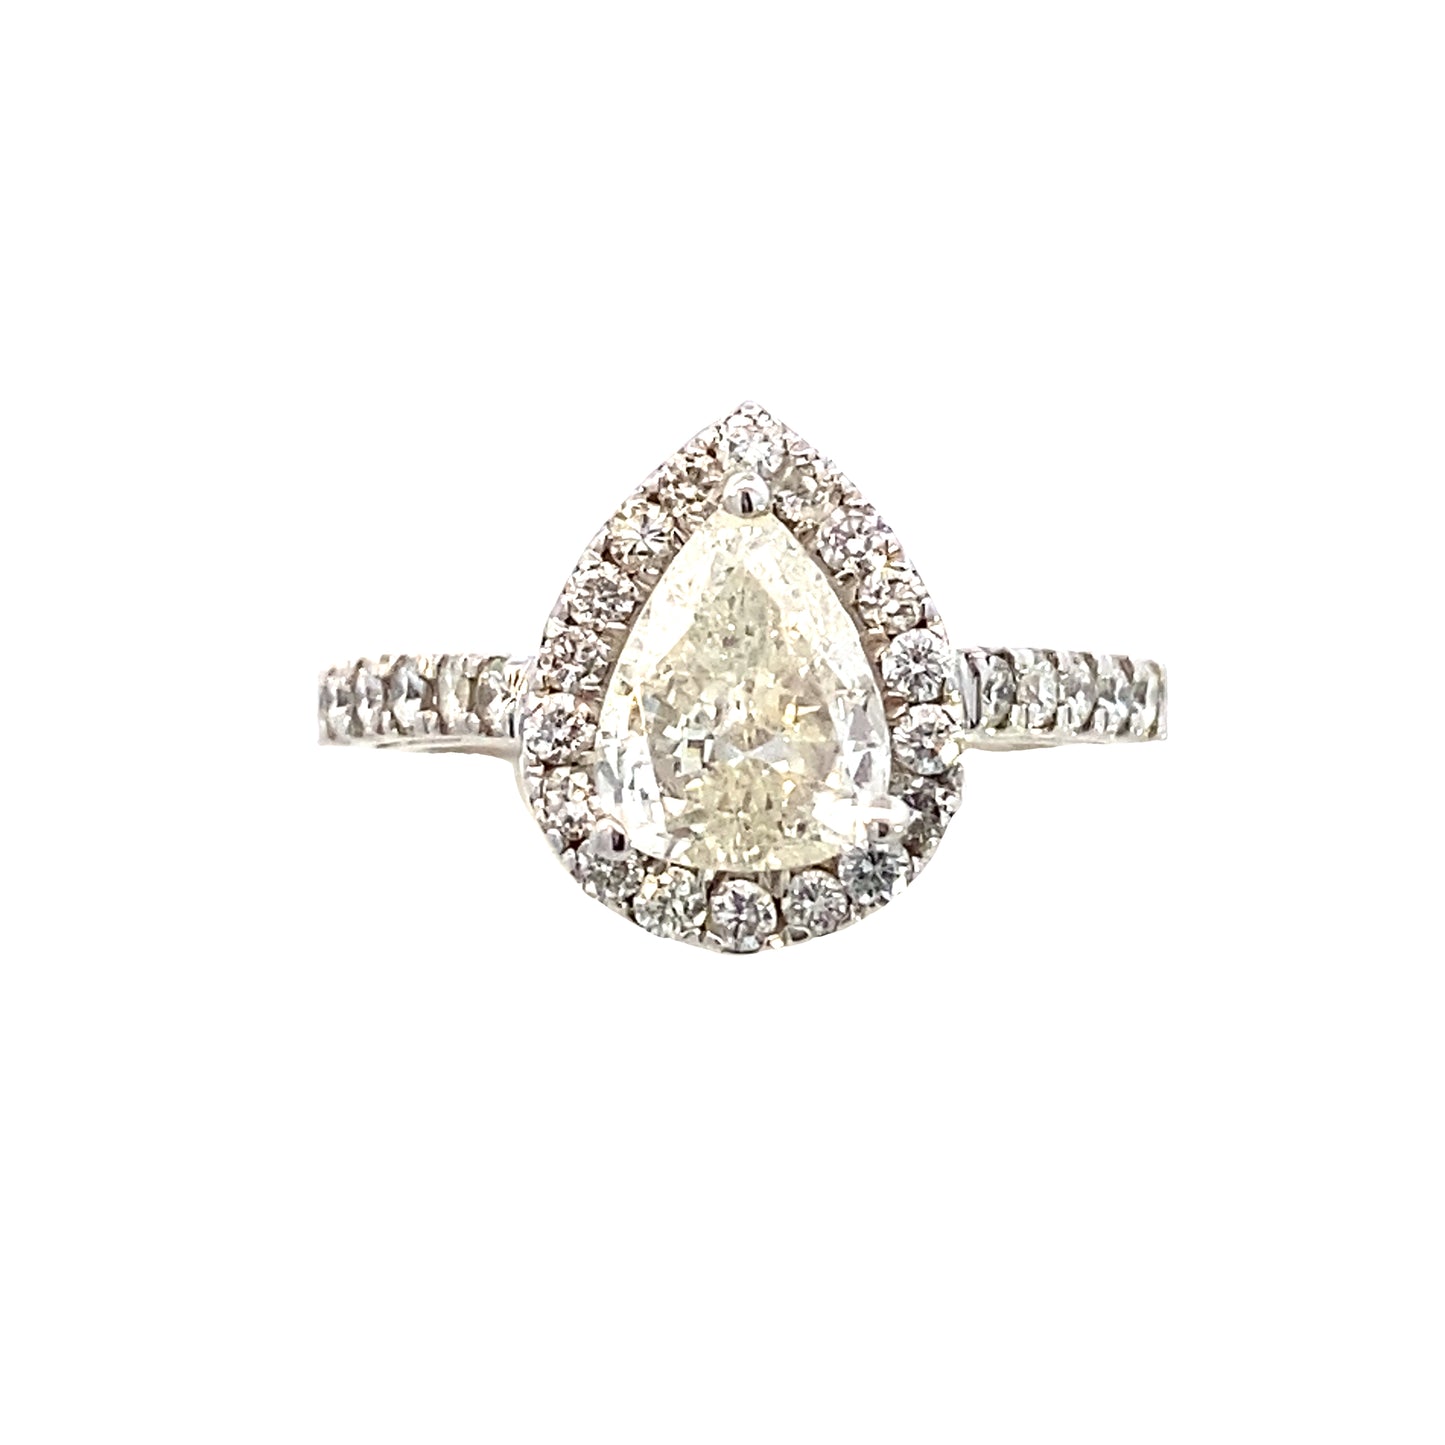 14k Diamond Pear Cut Diamond Halo White Gold Engagement Ring | Luby Diamond Collection | Luby 